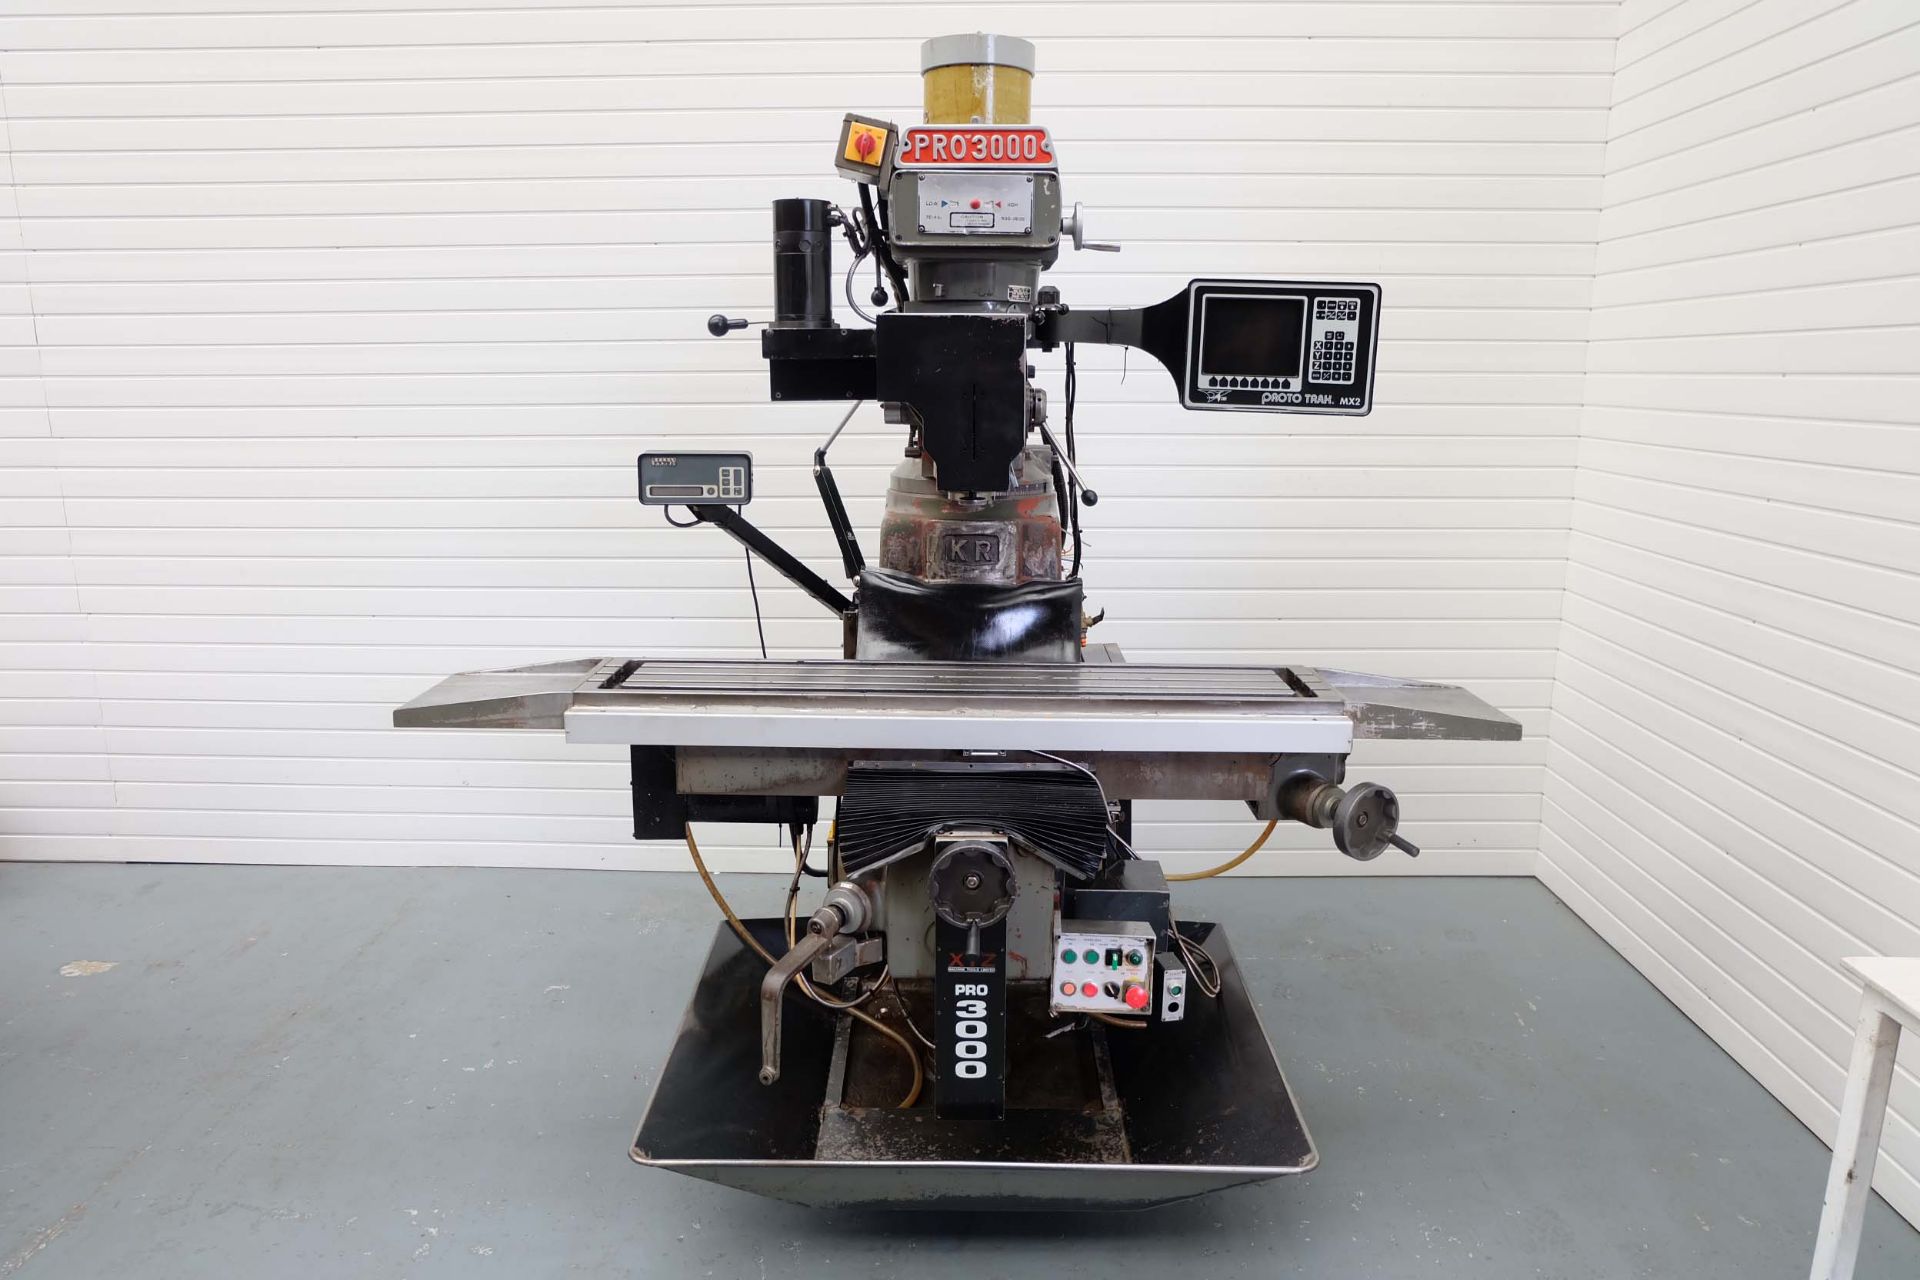 XYZ Pro 3000 SLV Turret Milling Machine With ProTrak MX2 Control. Table Size 58" x 12". Spindle Tap